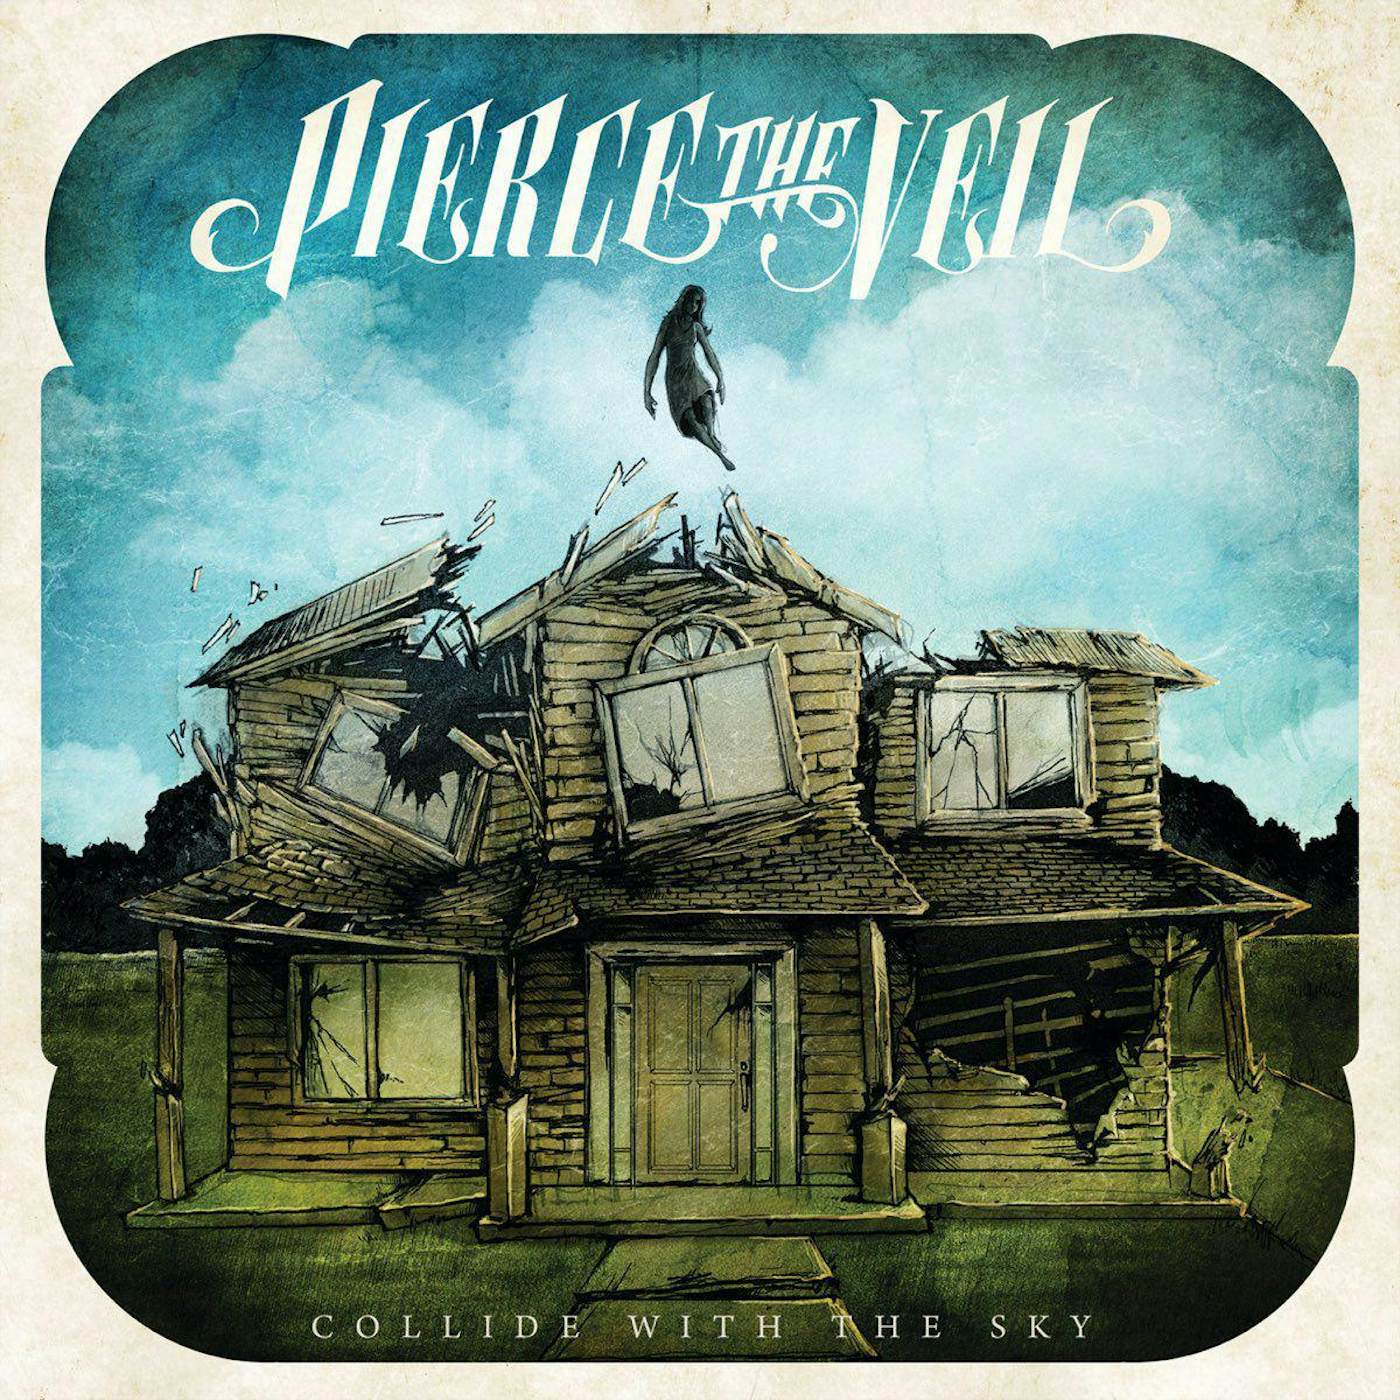 Pierce The Veil Collide With The Sky Vinyl Record